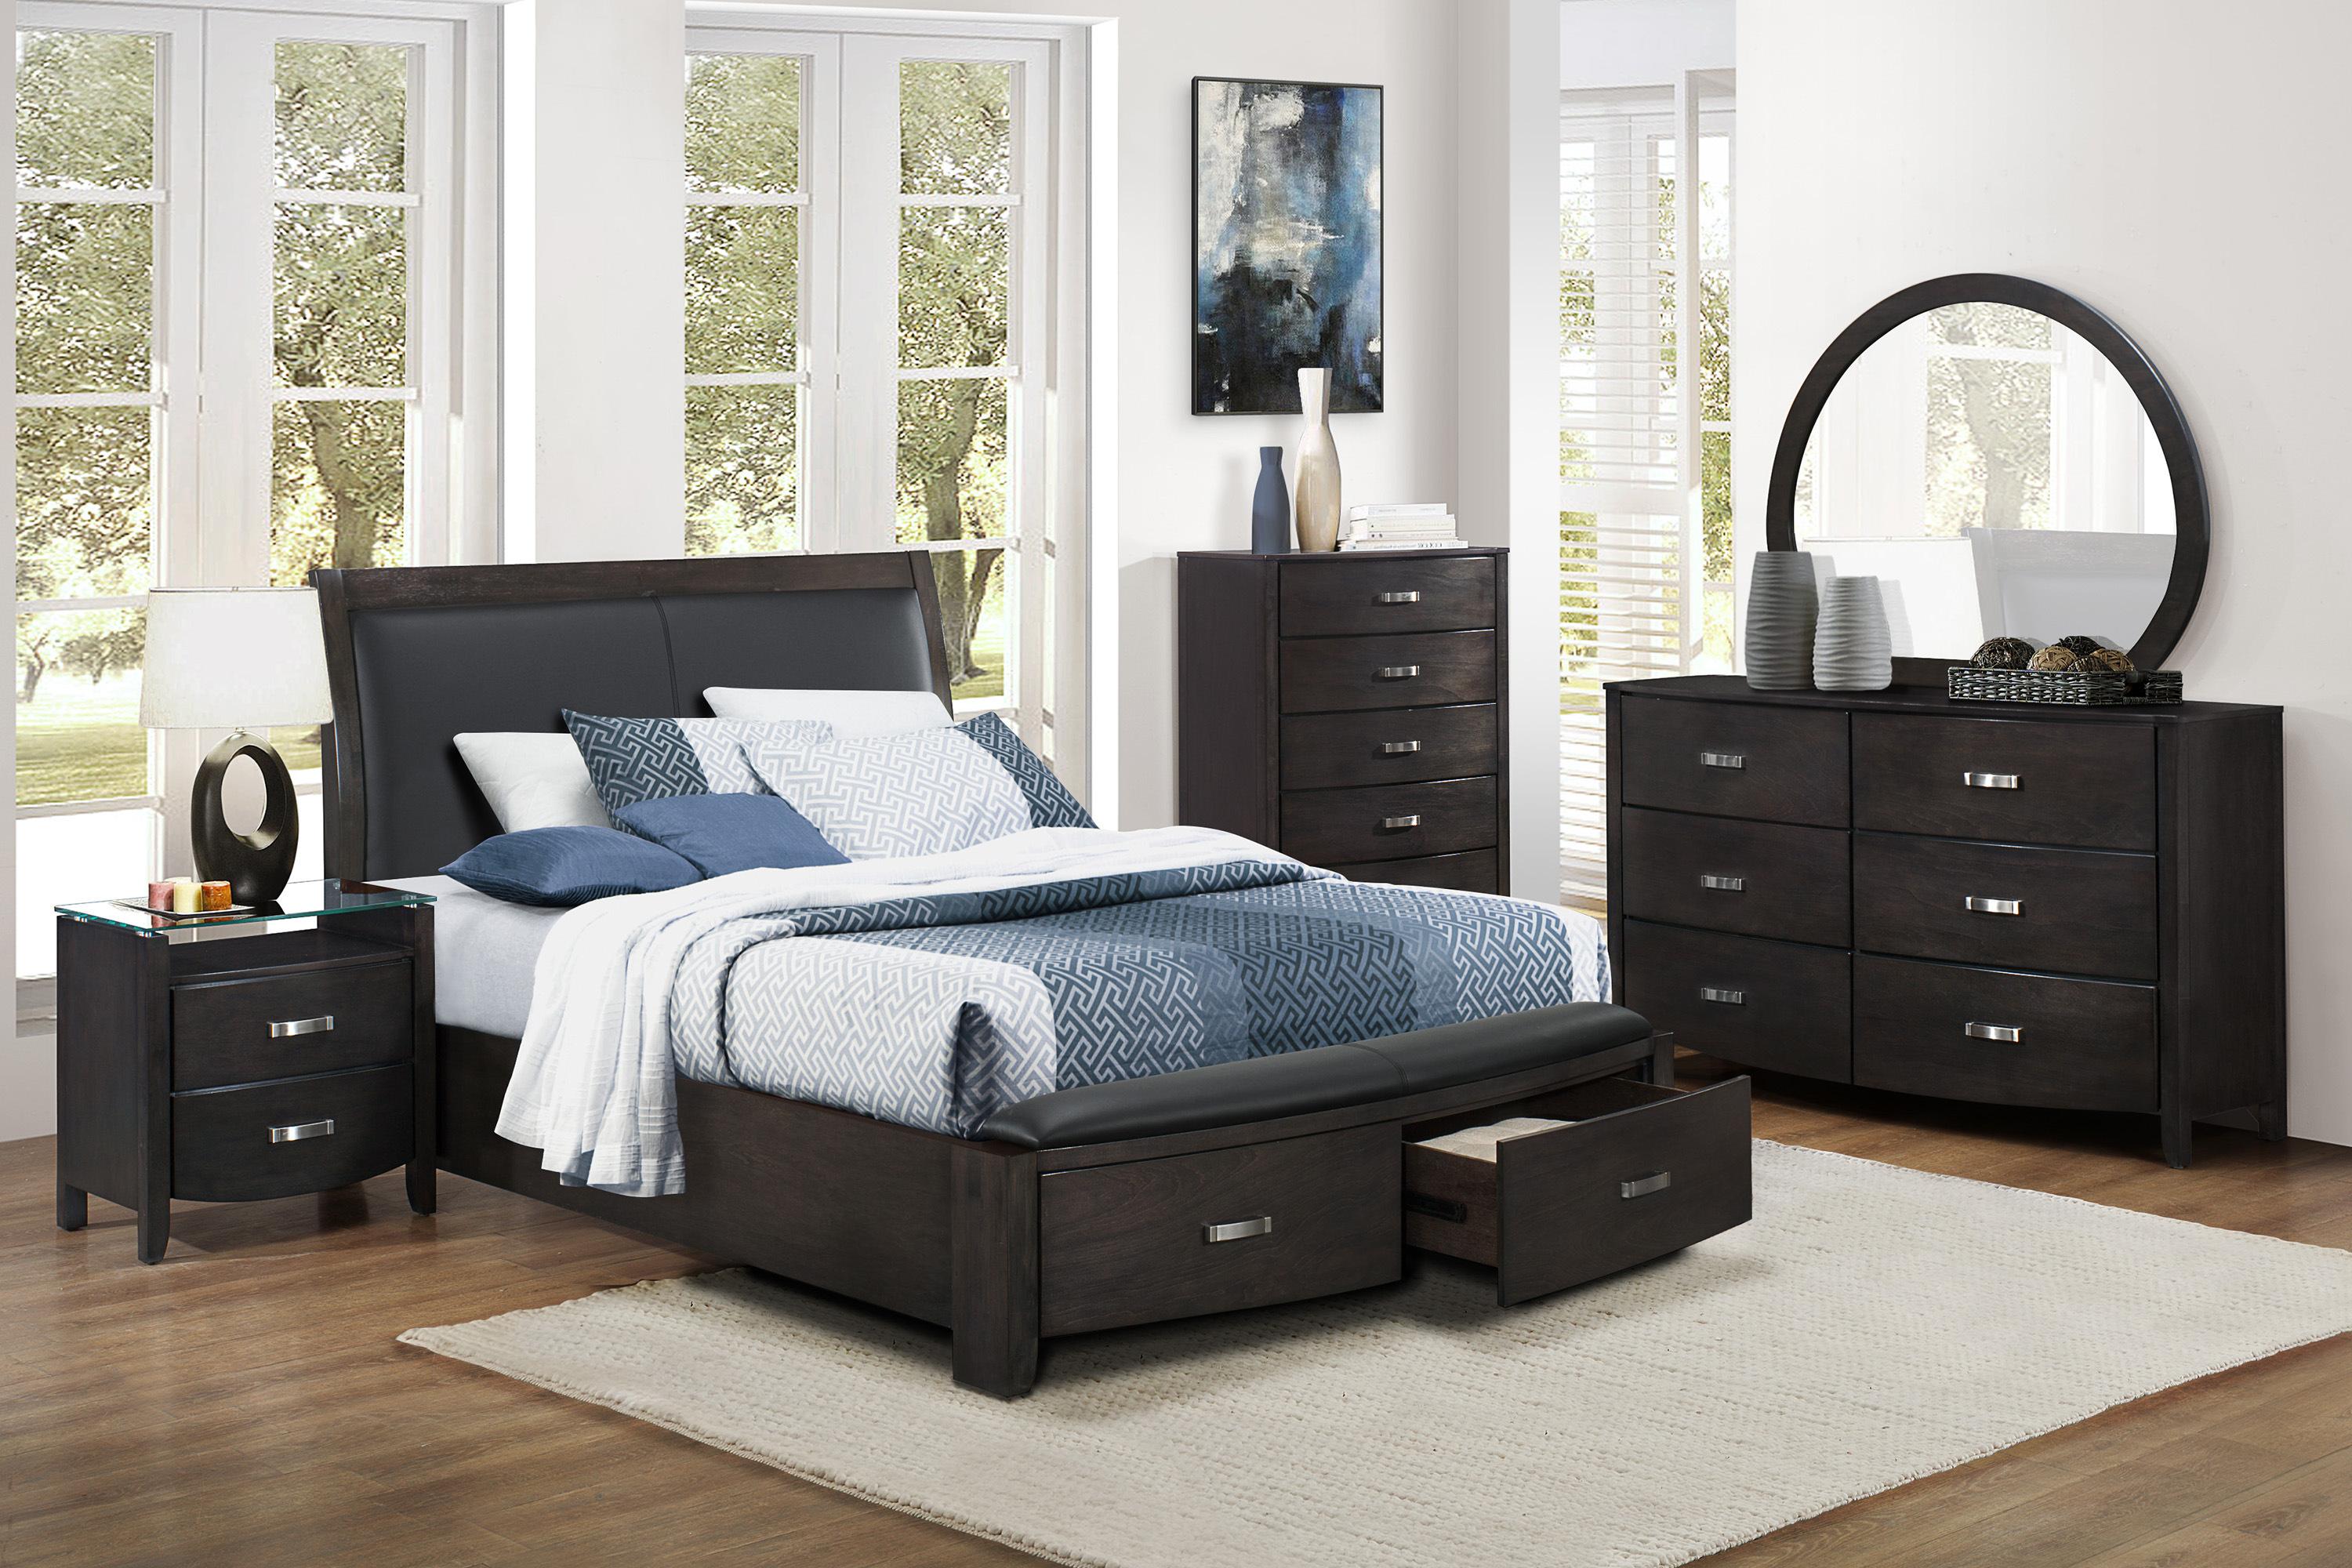 Contemporary Bedroom Set 1737KNGY-1EK-5PC Lyric 1737KNGY-1EK-5PC in Gray Faux Leather